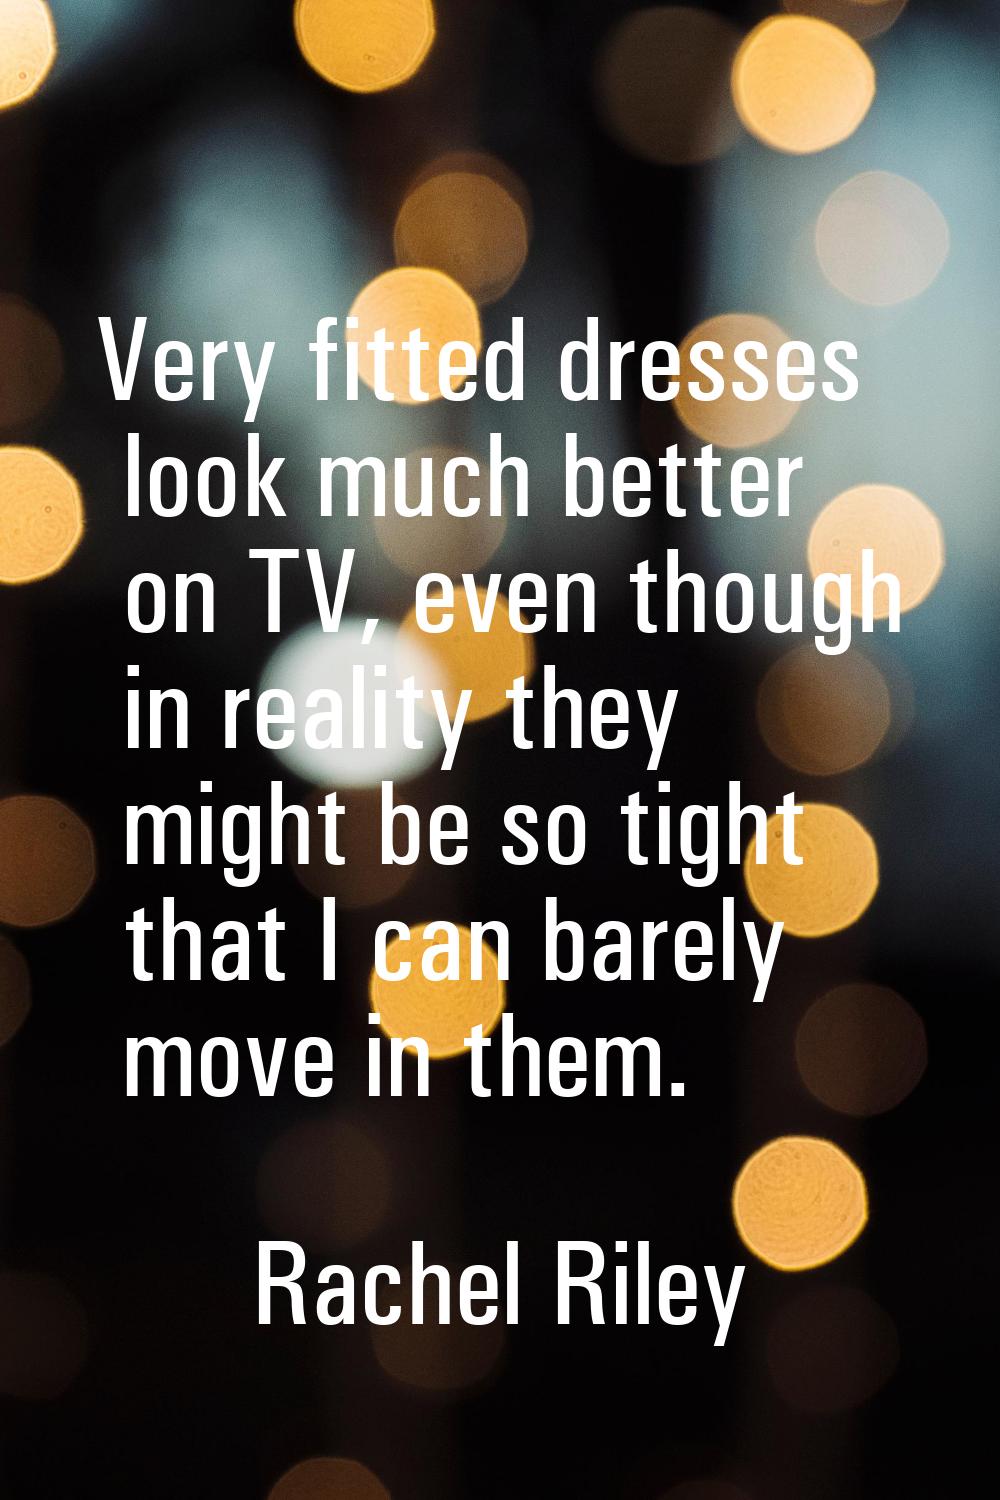 Very fitted dresses look much better on TV, even though in reality they might be so tight that I ca